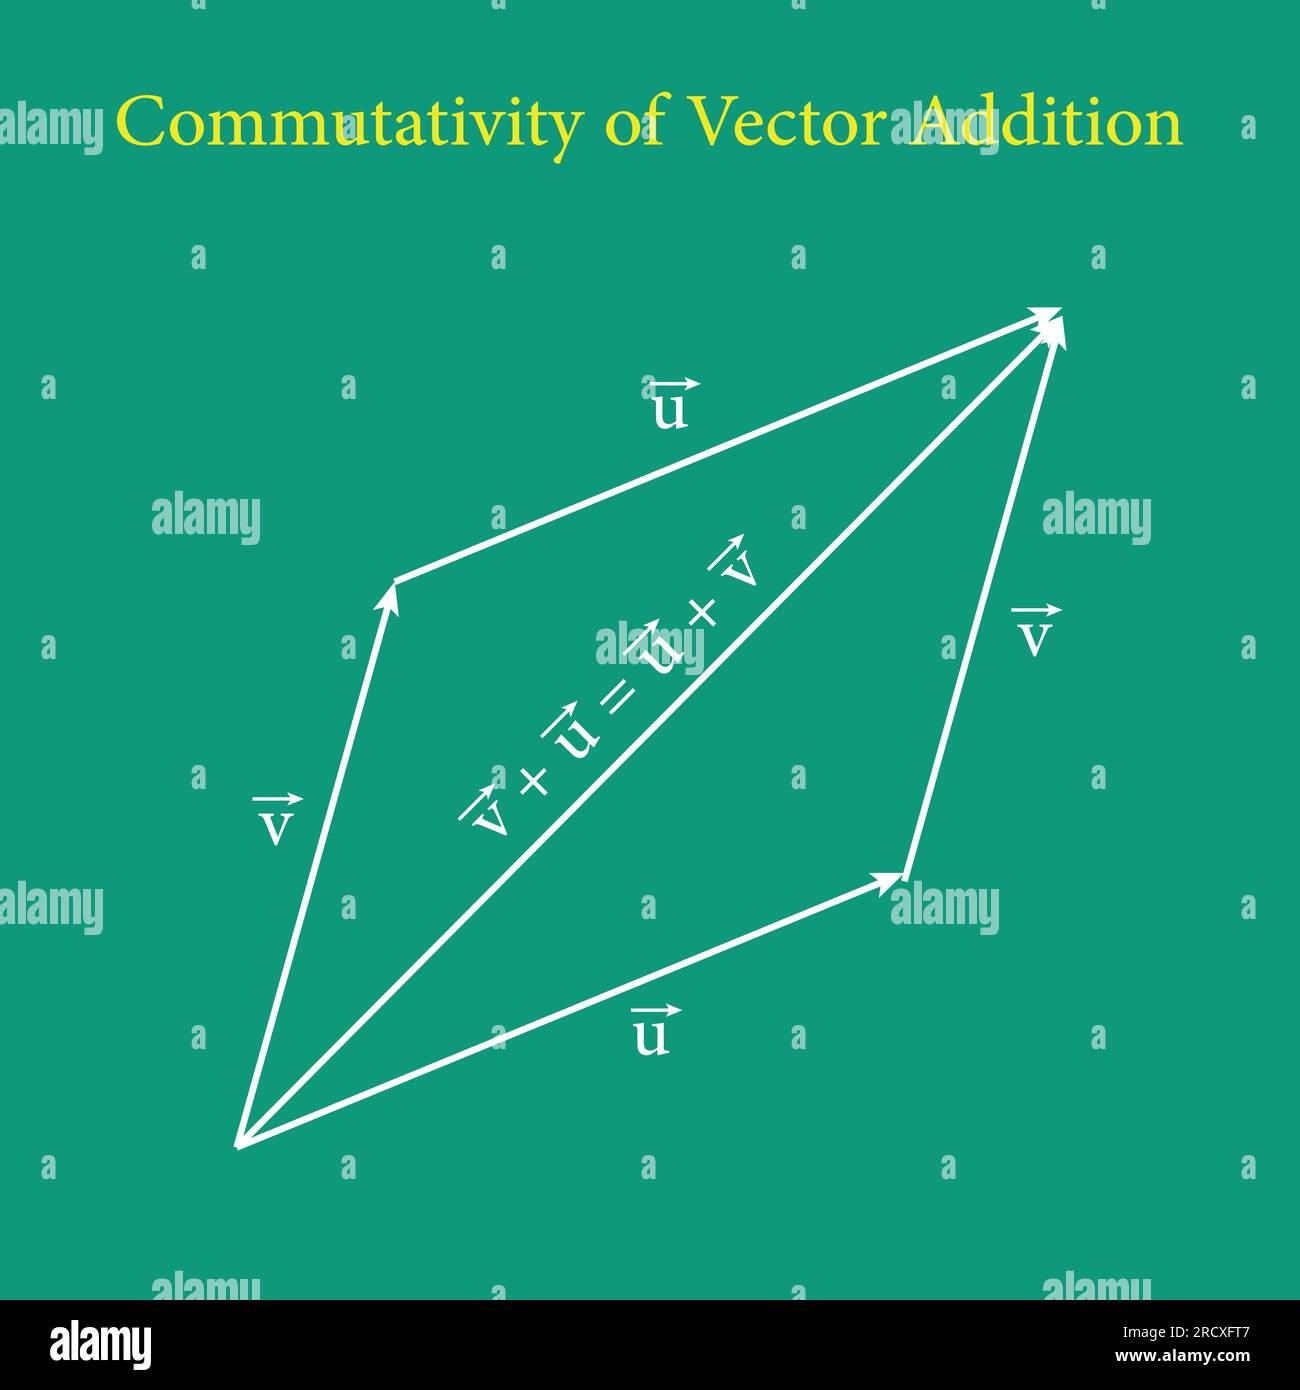 Commutativity of vector addition graphical method. Commutative law. Triangle law of vector addition. Definition of a vector space. Properties of vecto Stock Vector